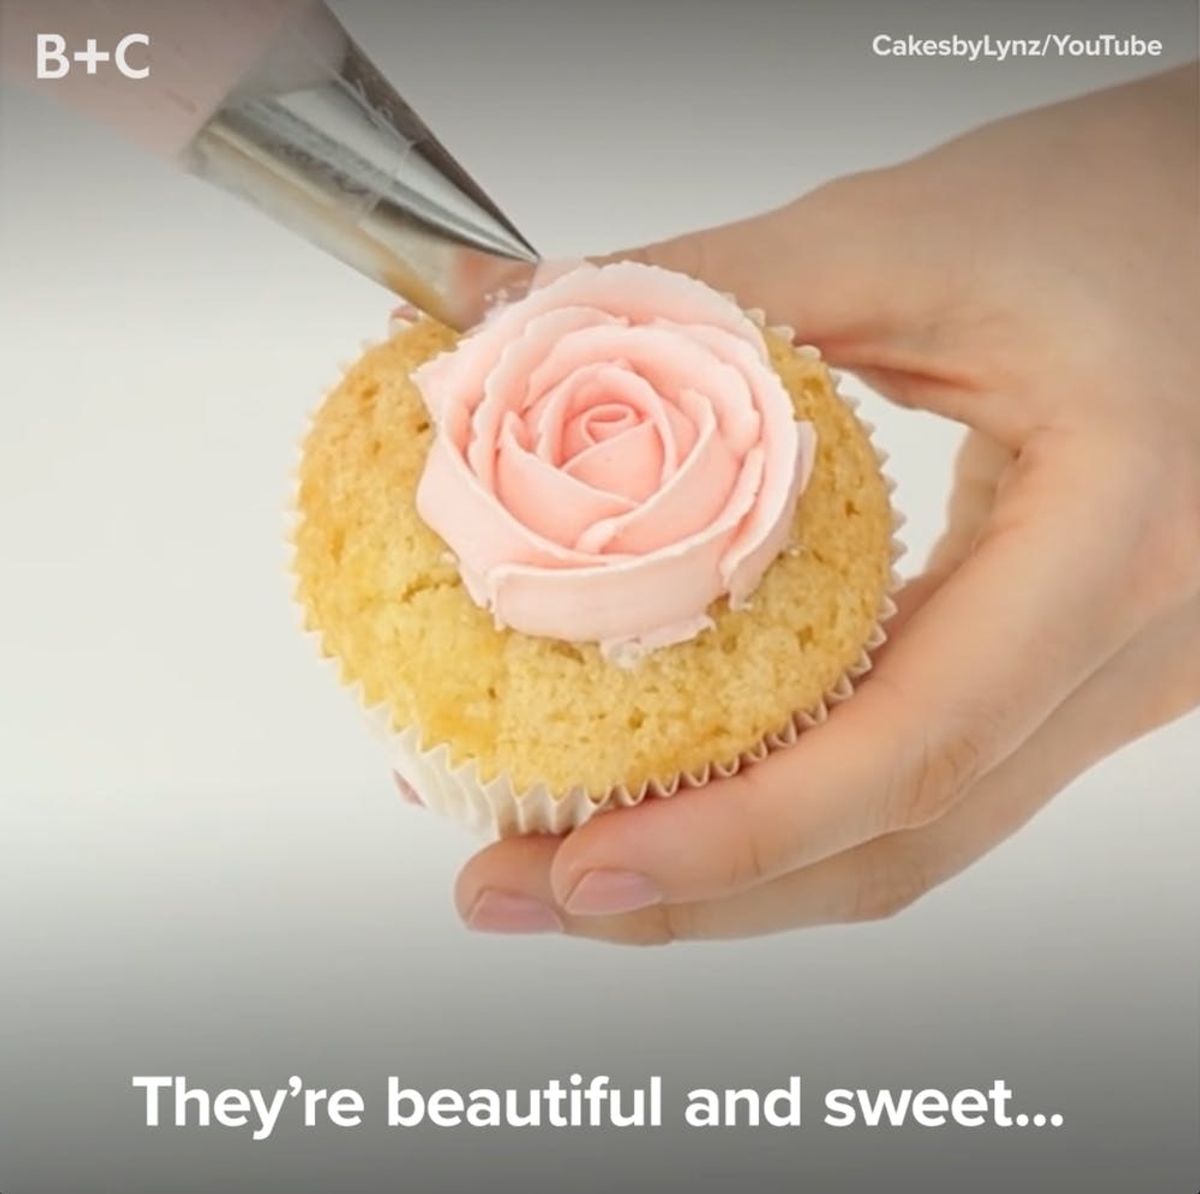 Frosting Flowers Are WAY Better Than the Real Deal